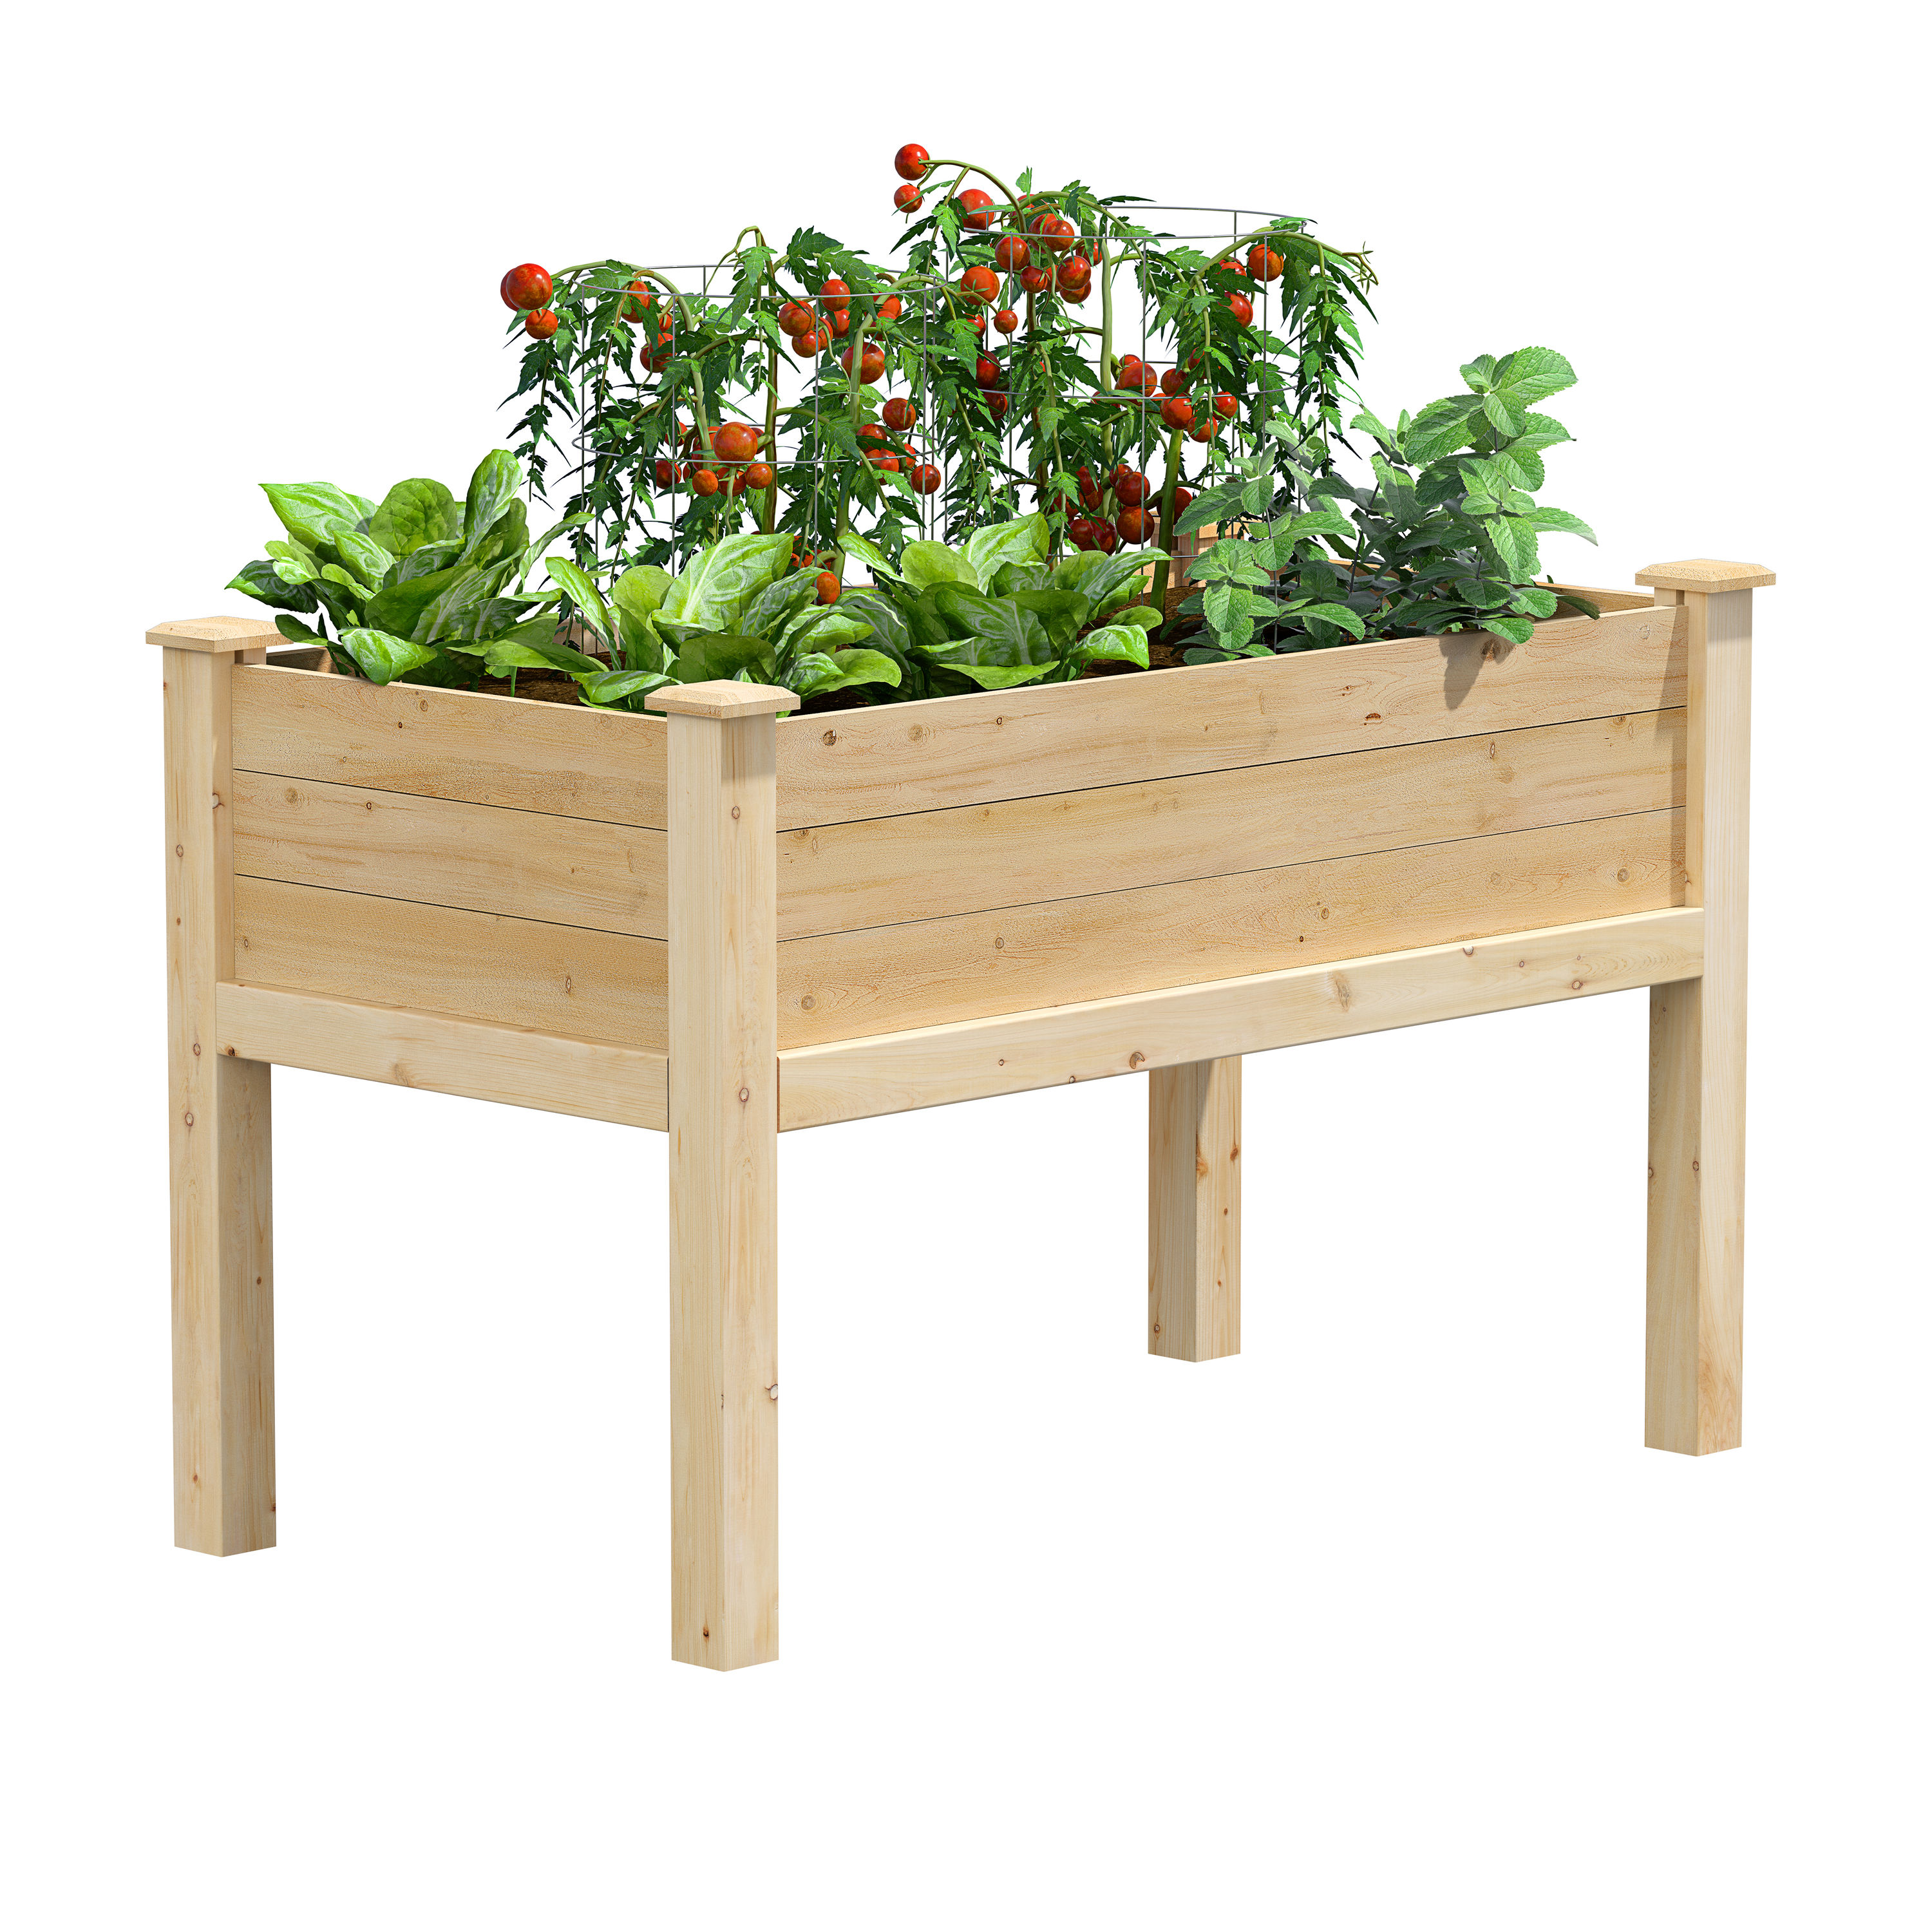 Elevated Plant Bed for Vegetables and Flowers Herb Boxes for Indoor Gardening Each Box Measures 15 X 15 X 9 Inches Six Raised Garden Beds for Planting Waterproof Rectangular Pots for Outdoor 